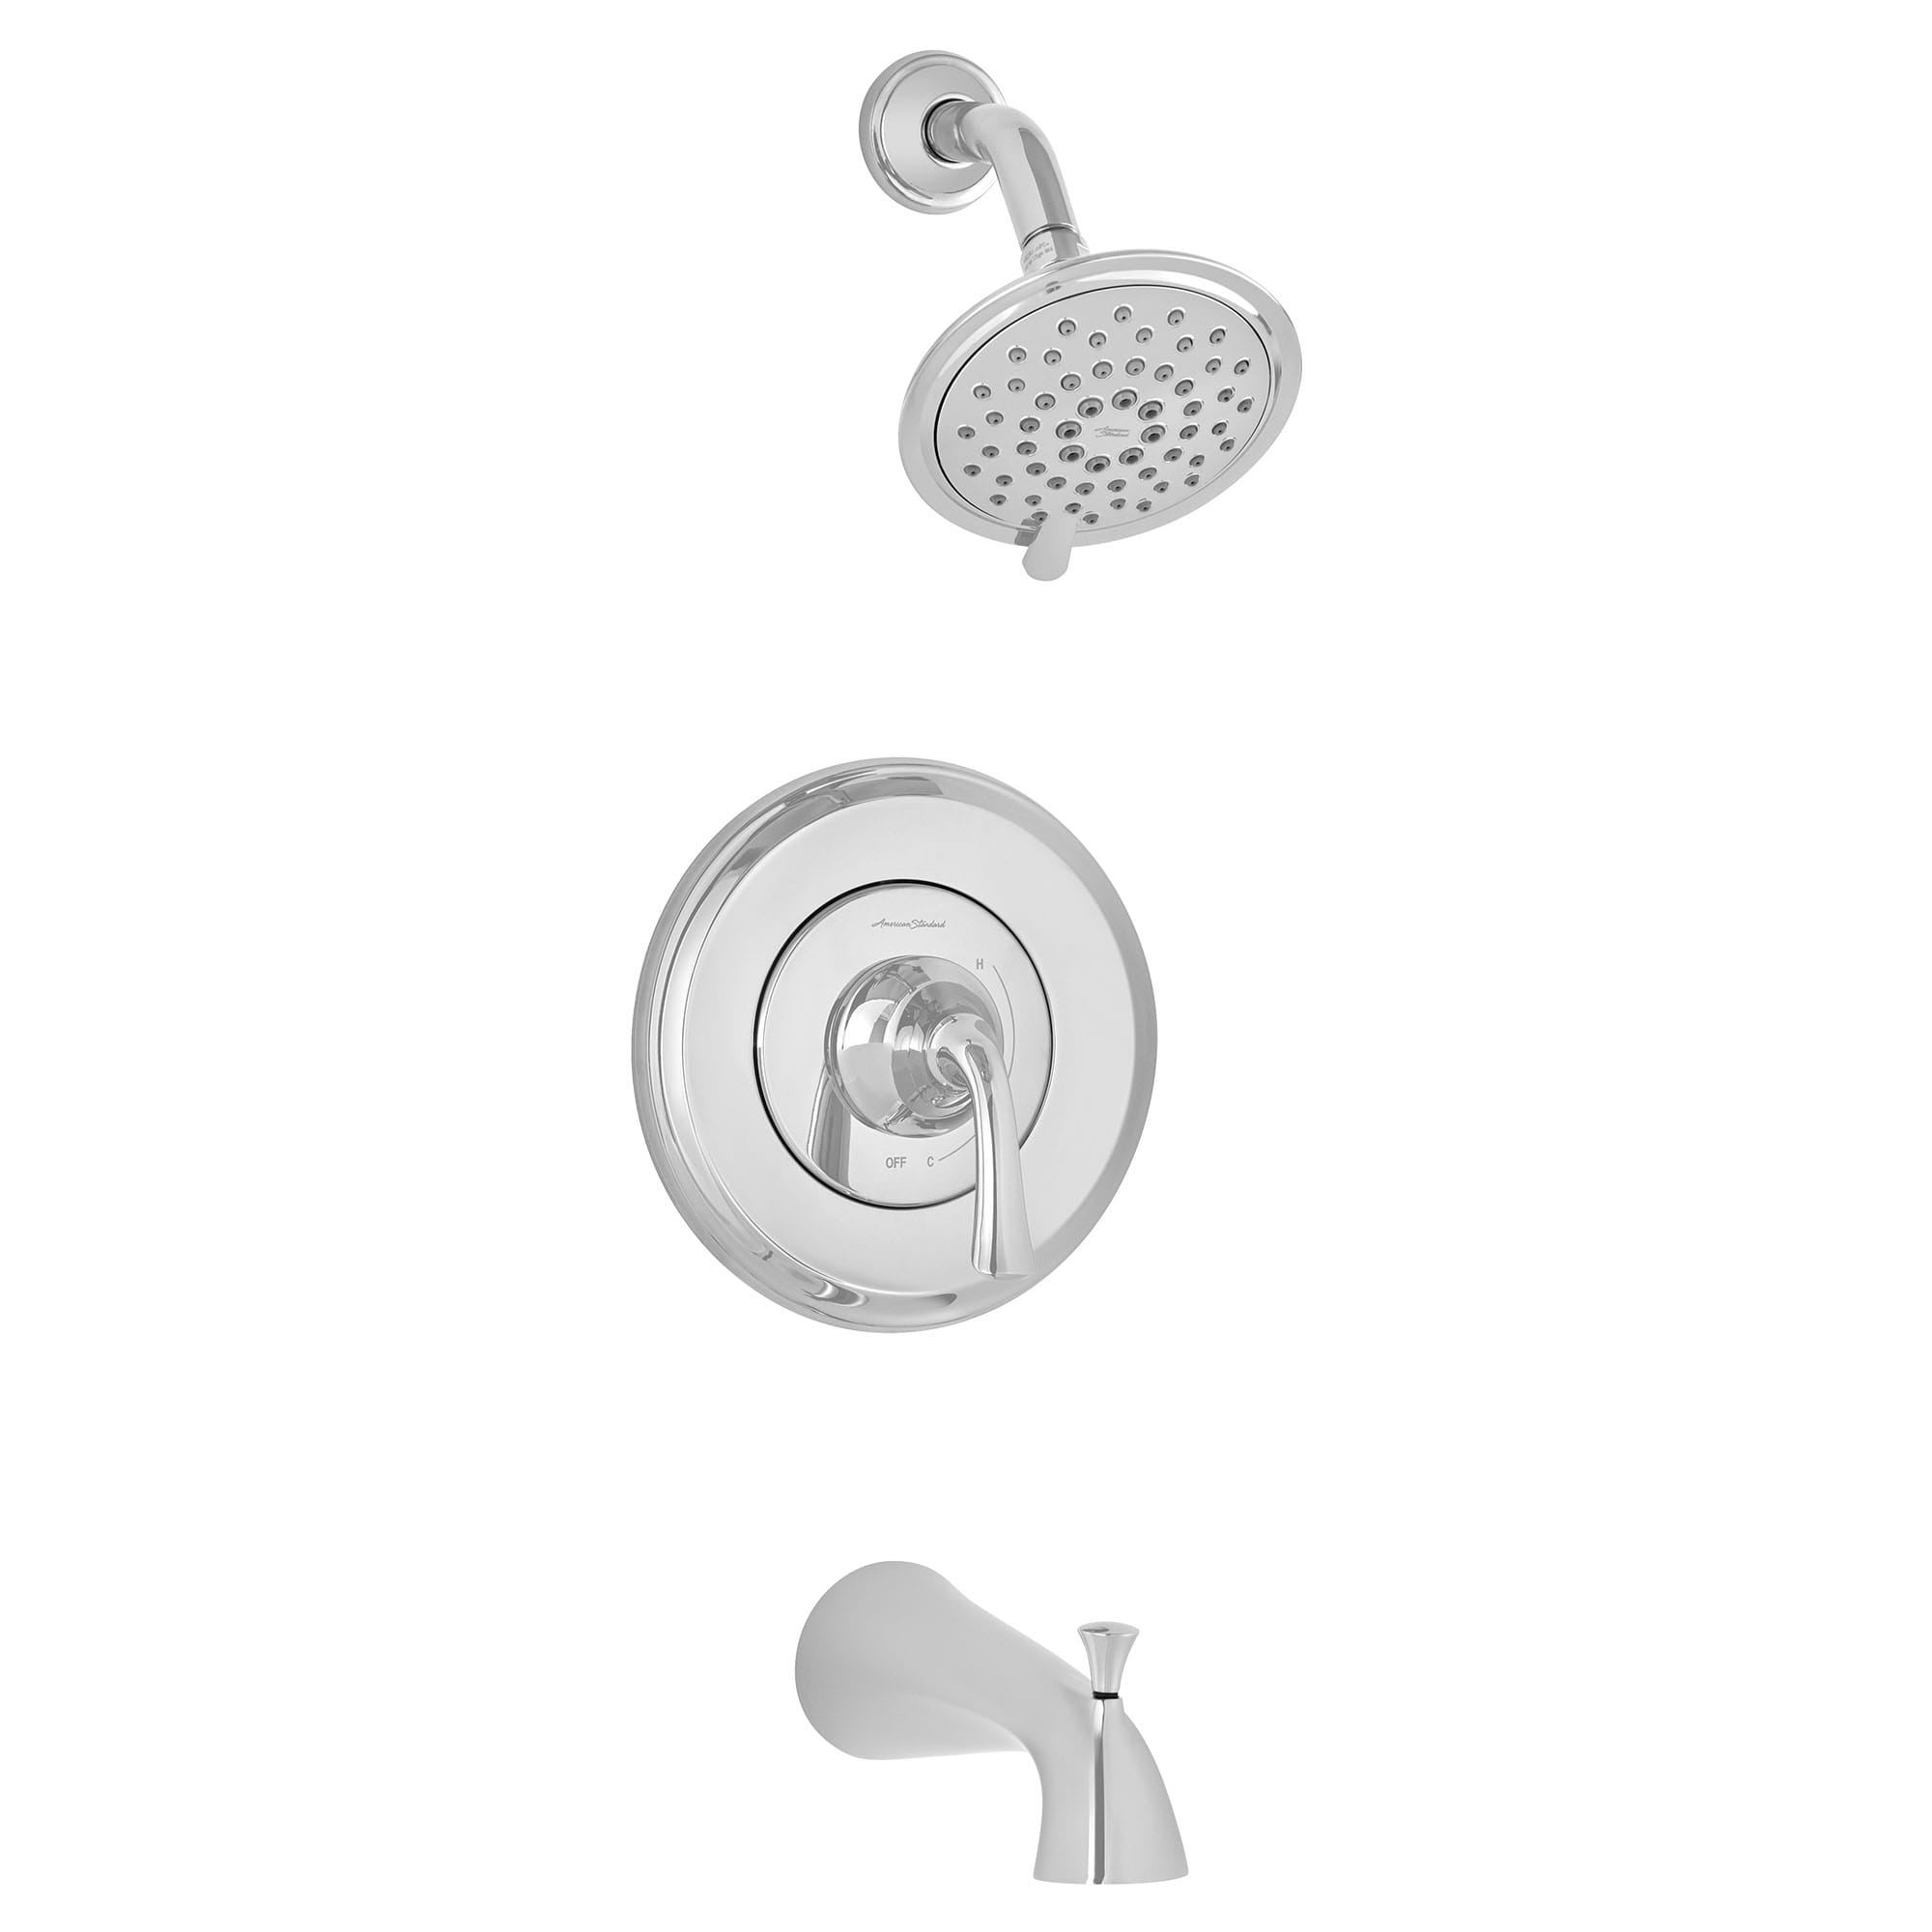 Patience 18 gpm 66 L min Tub and Shower Trim Kit With Water Saving 3 Function Showerhead Double Ceramic Pressure Balance Cartridge With Lever Handle CHROME